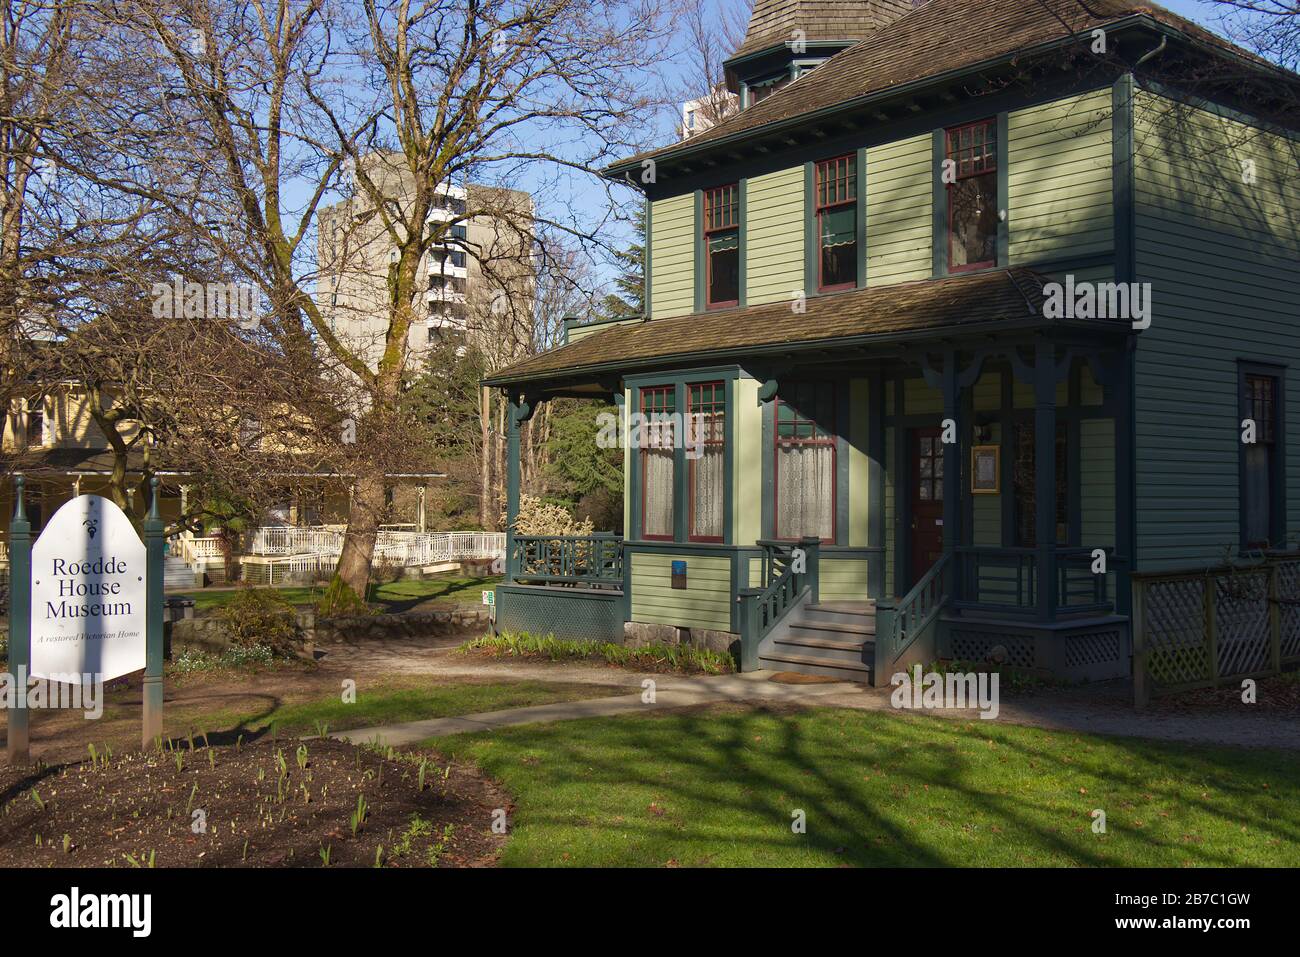 Vancouver, Canada - February 20, 2020: A View of The Roedde House Museum. A late-Victorian home located at 1415 Barclay Street in Vancouver. Stock Photo